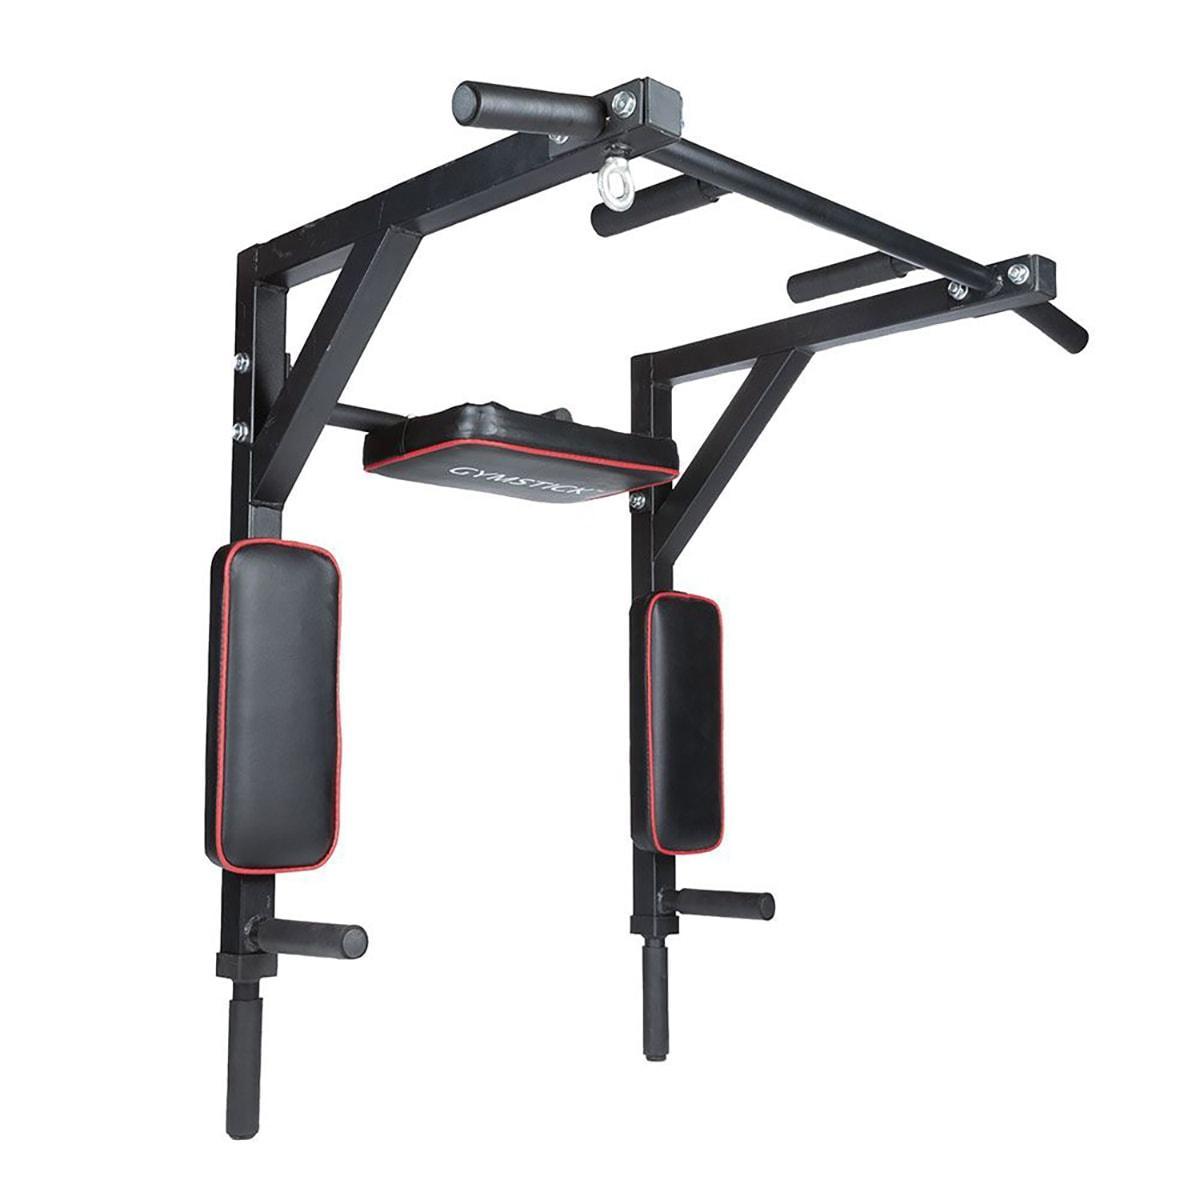 Gymstick 2-in-1 Chin Pull & Dip Stand